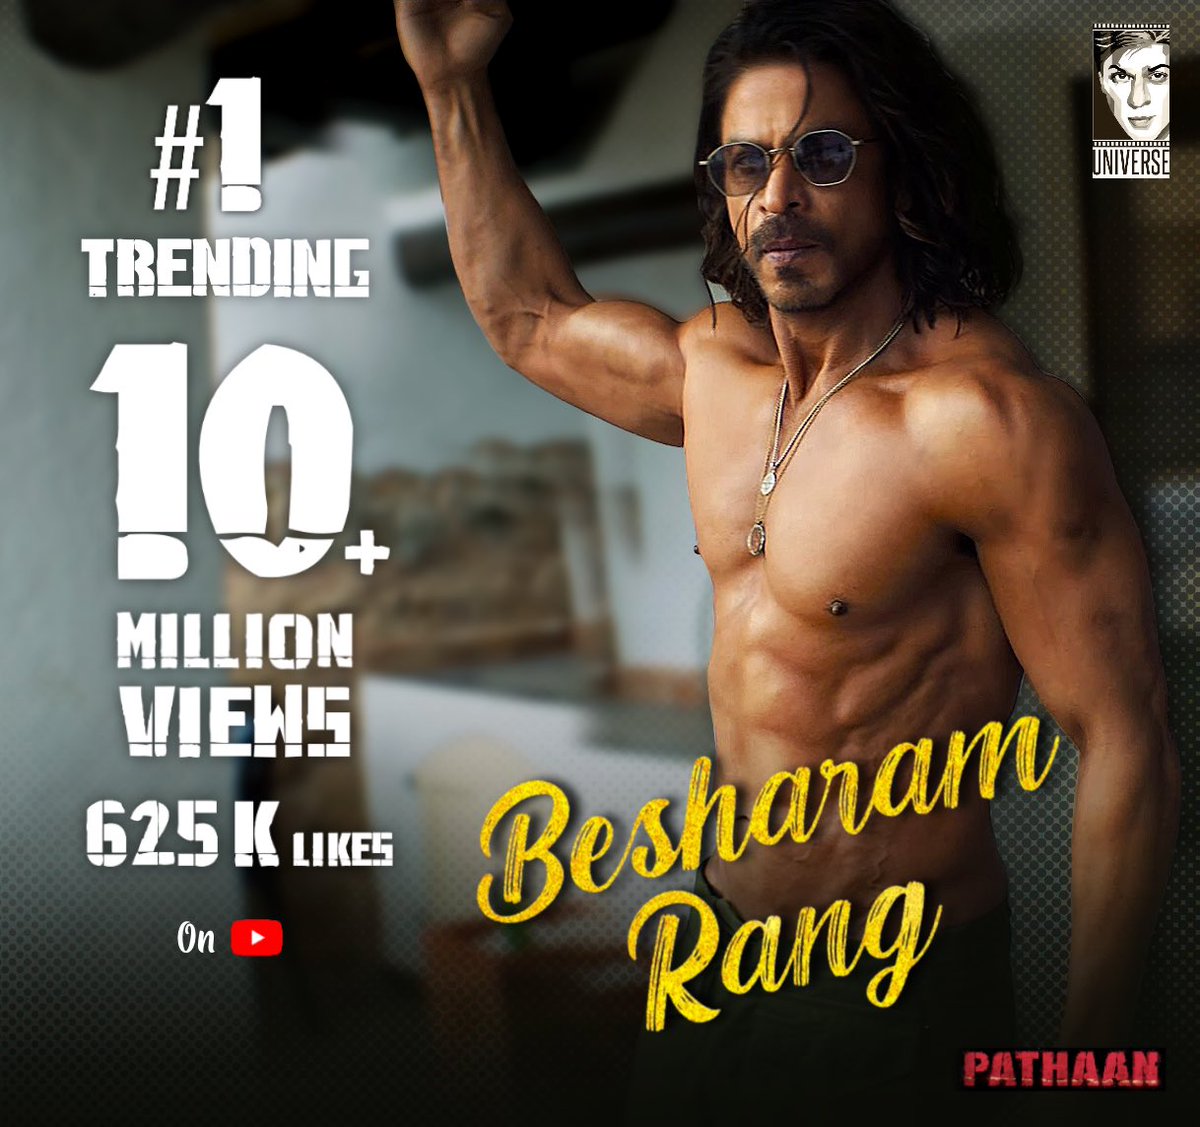 #BesharamRang is trending at No 1 position on Youtube with over 10M+ views in less than 12 hours and 6.25 Lakh likes! Easily the biggest party anthem of the year! Aur picture abhi baaki hain! 😉 #Pathaan @iamsrk @yrf @deepikapadukone #ShahRukhKhan #SRK #DeepikaPadukone